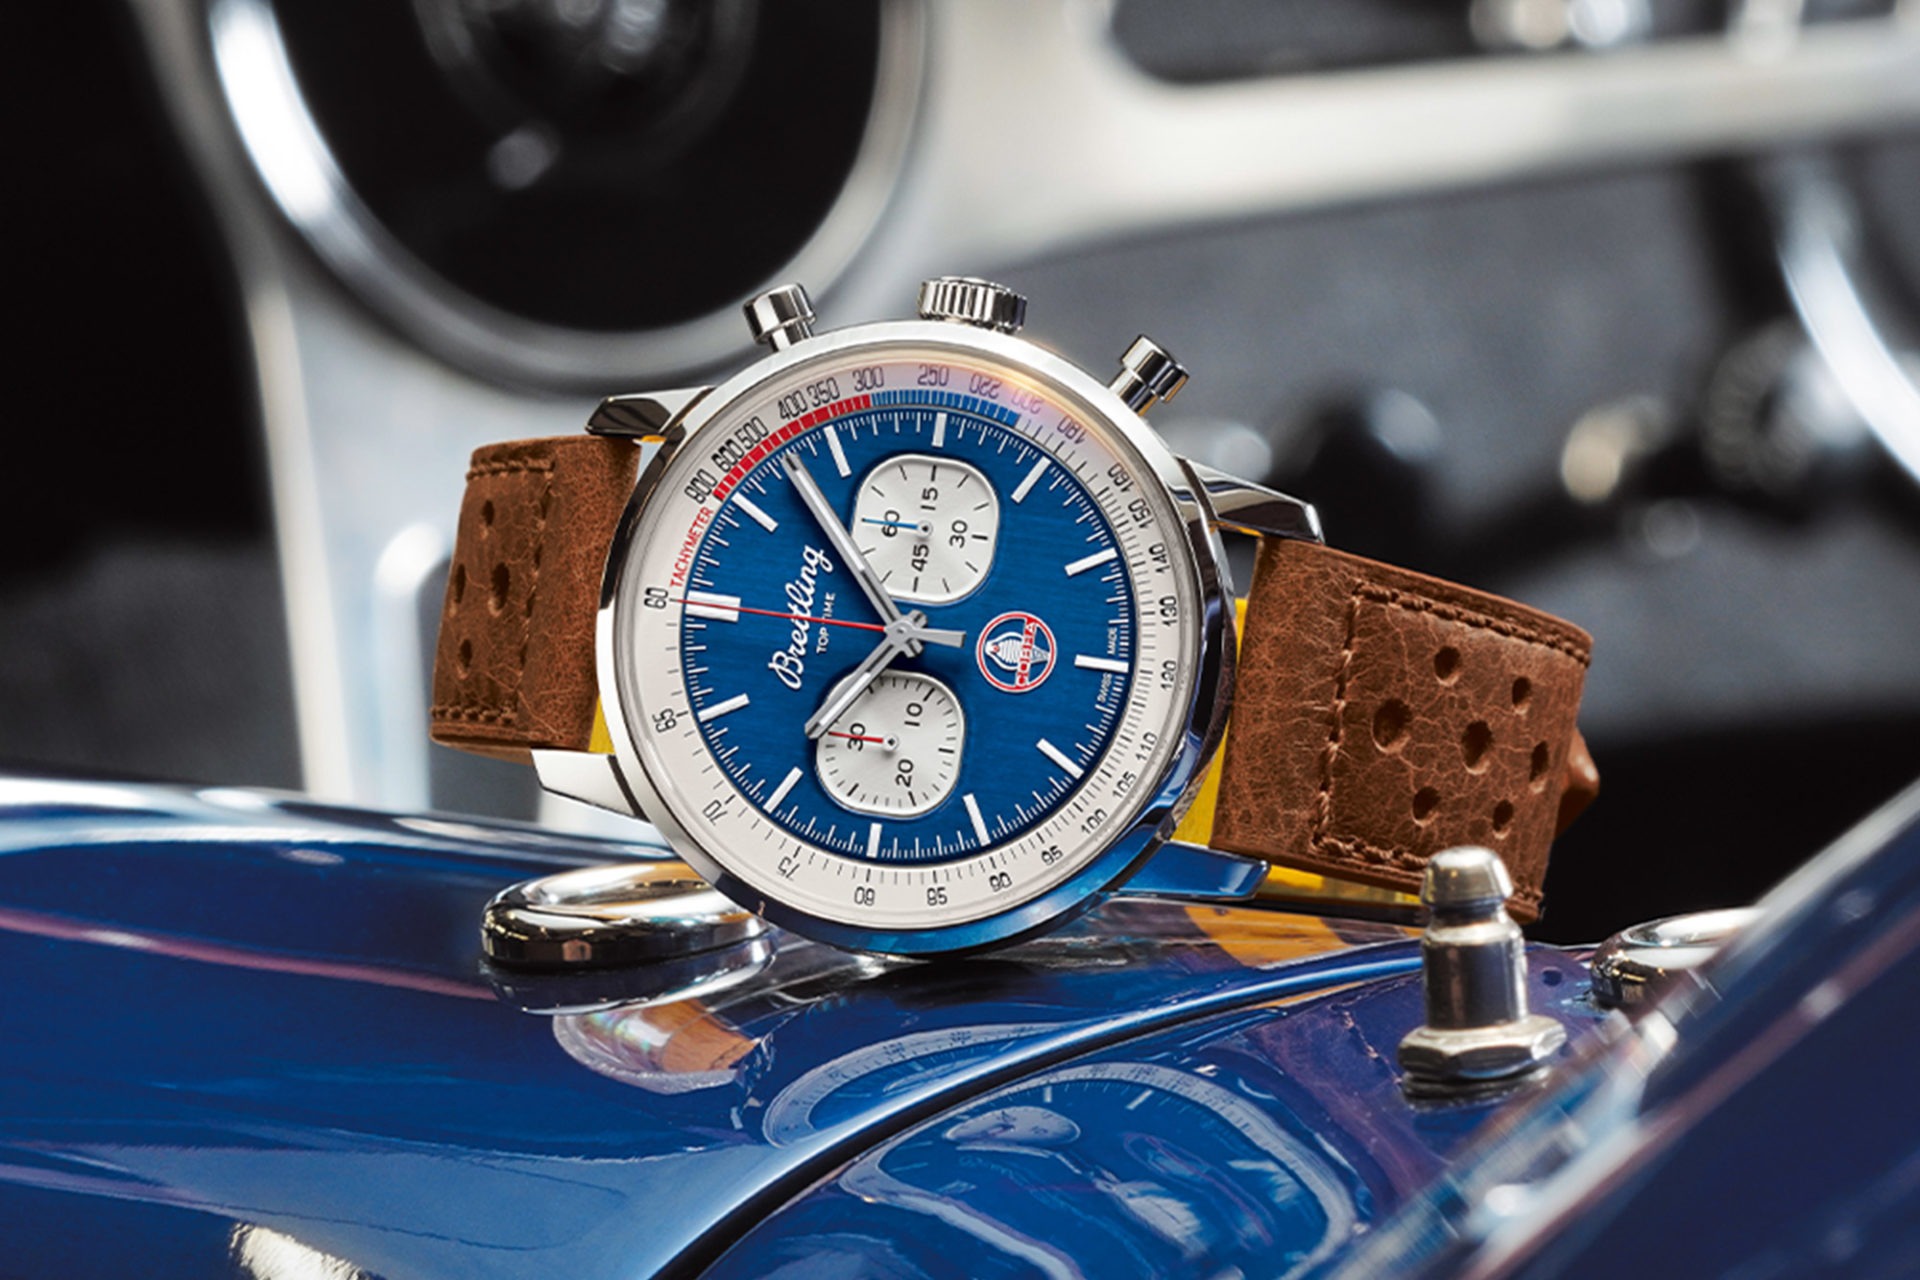 Breitling Top Time Classic Cars - Shelby Cobra